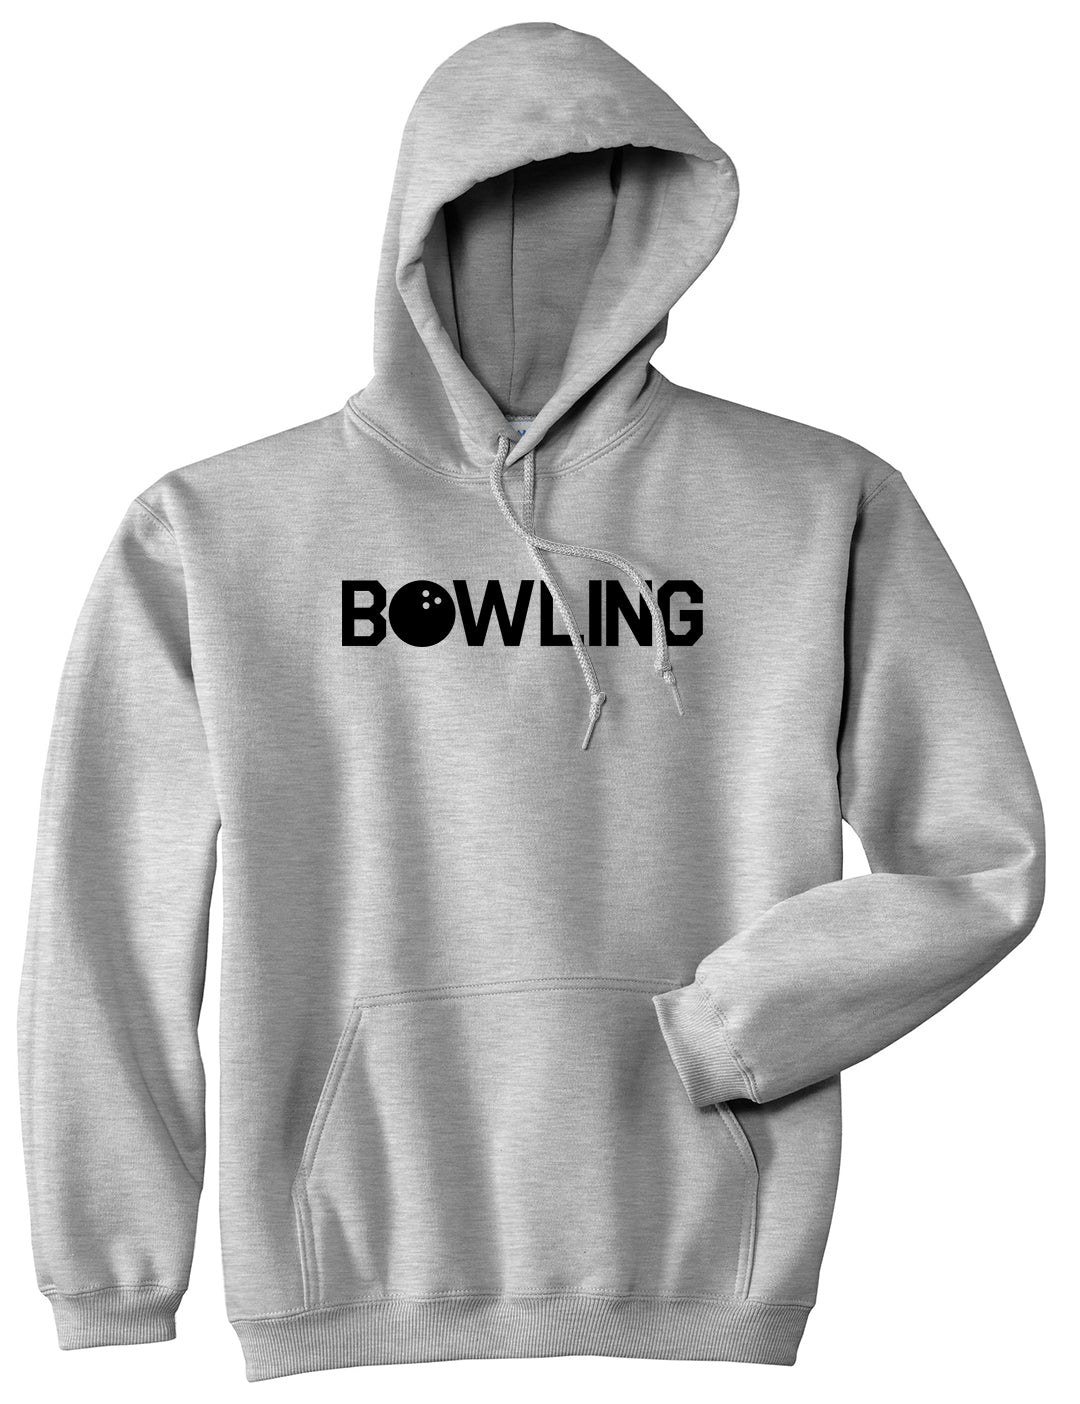 Bowling Grey Pullover Hoodie by Kings Of NY